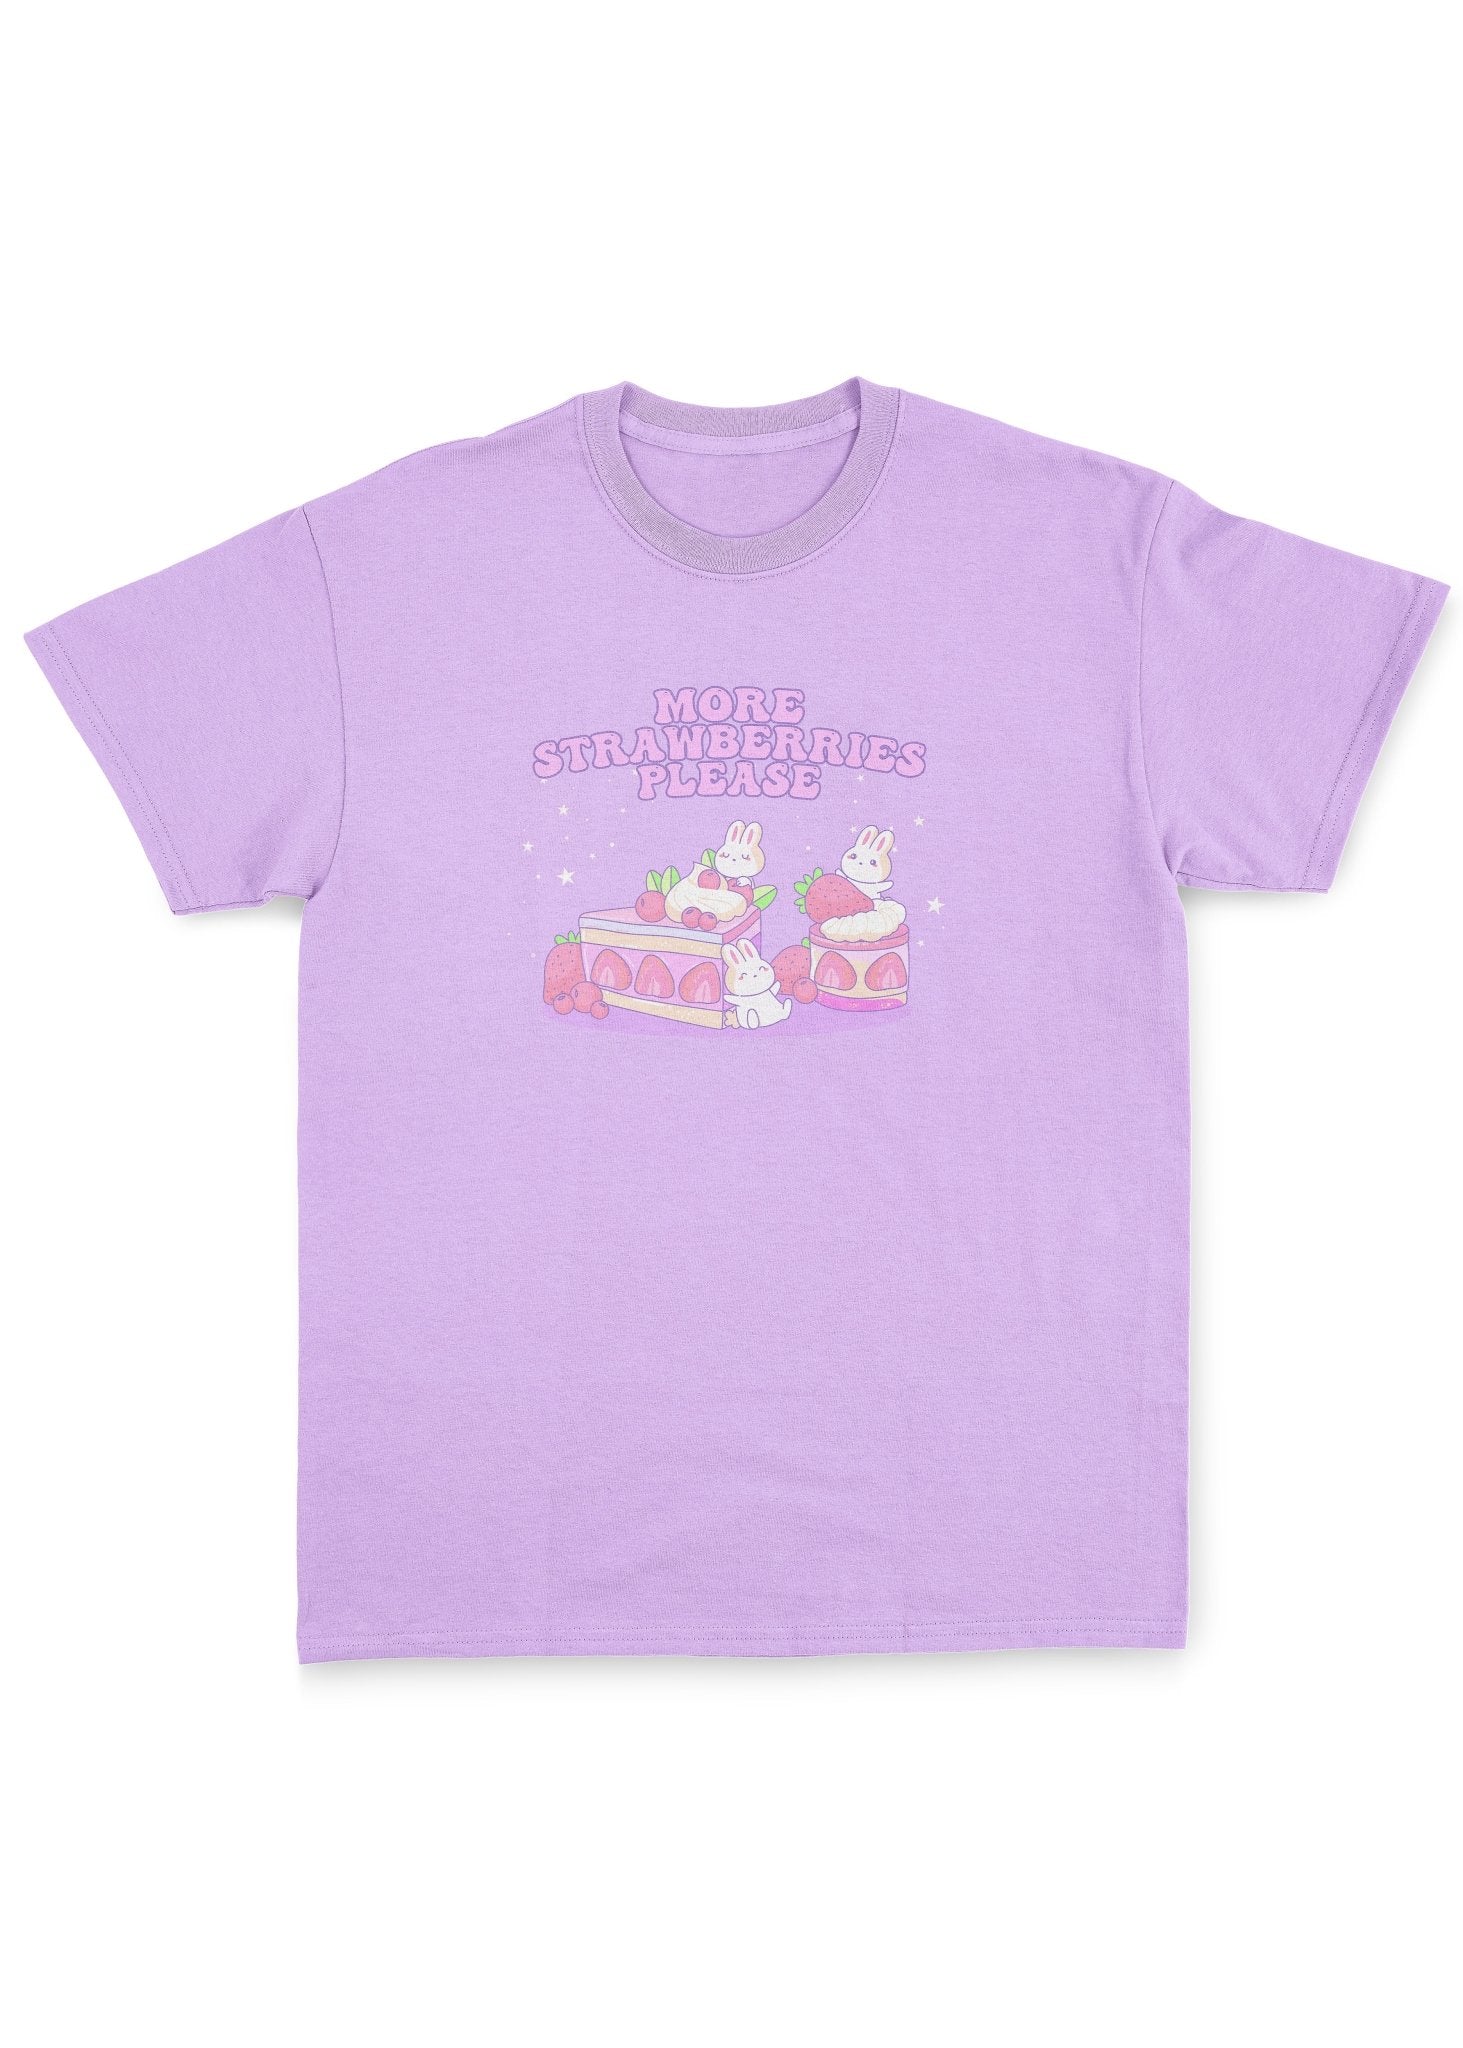 More Strawberries Please T-Shirt - In Control Clothing